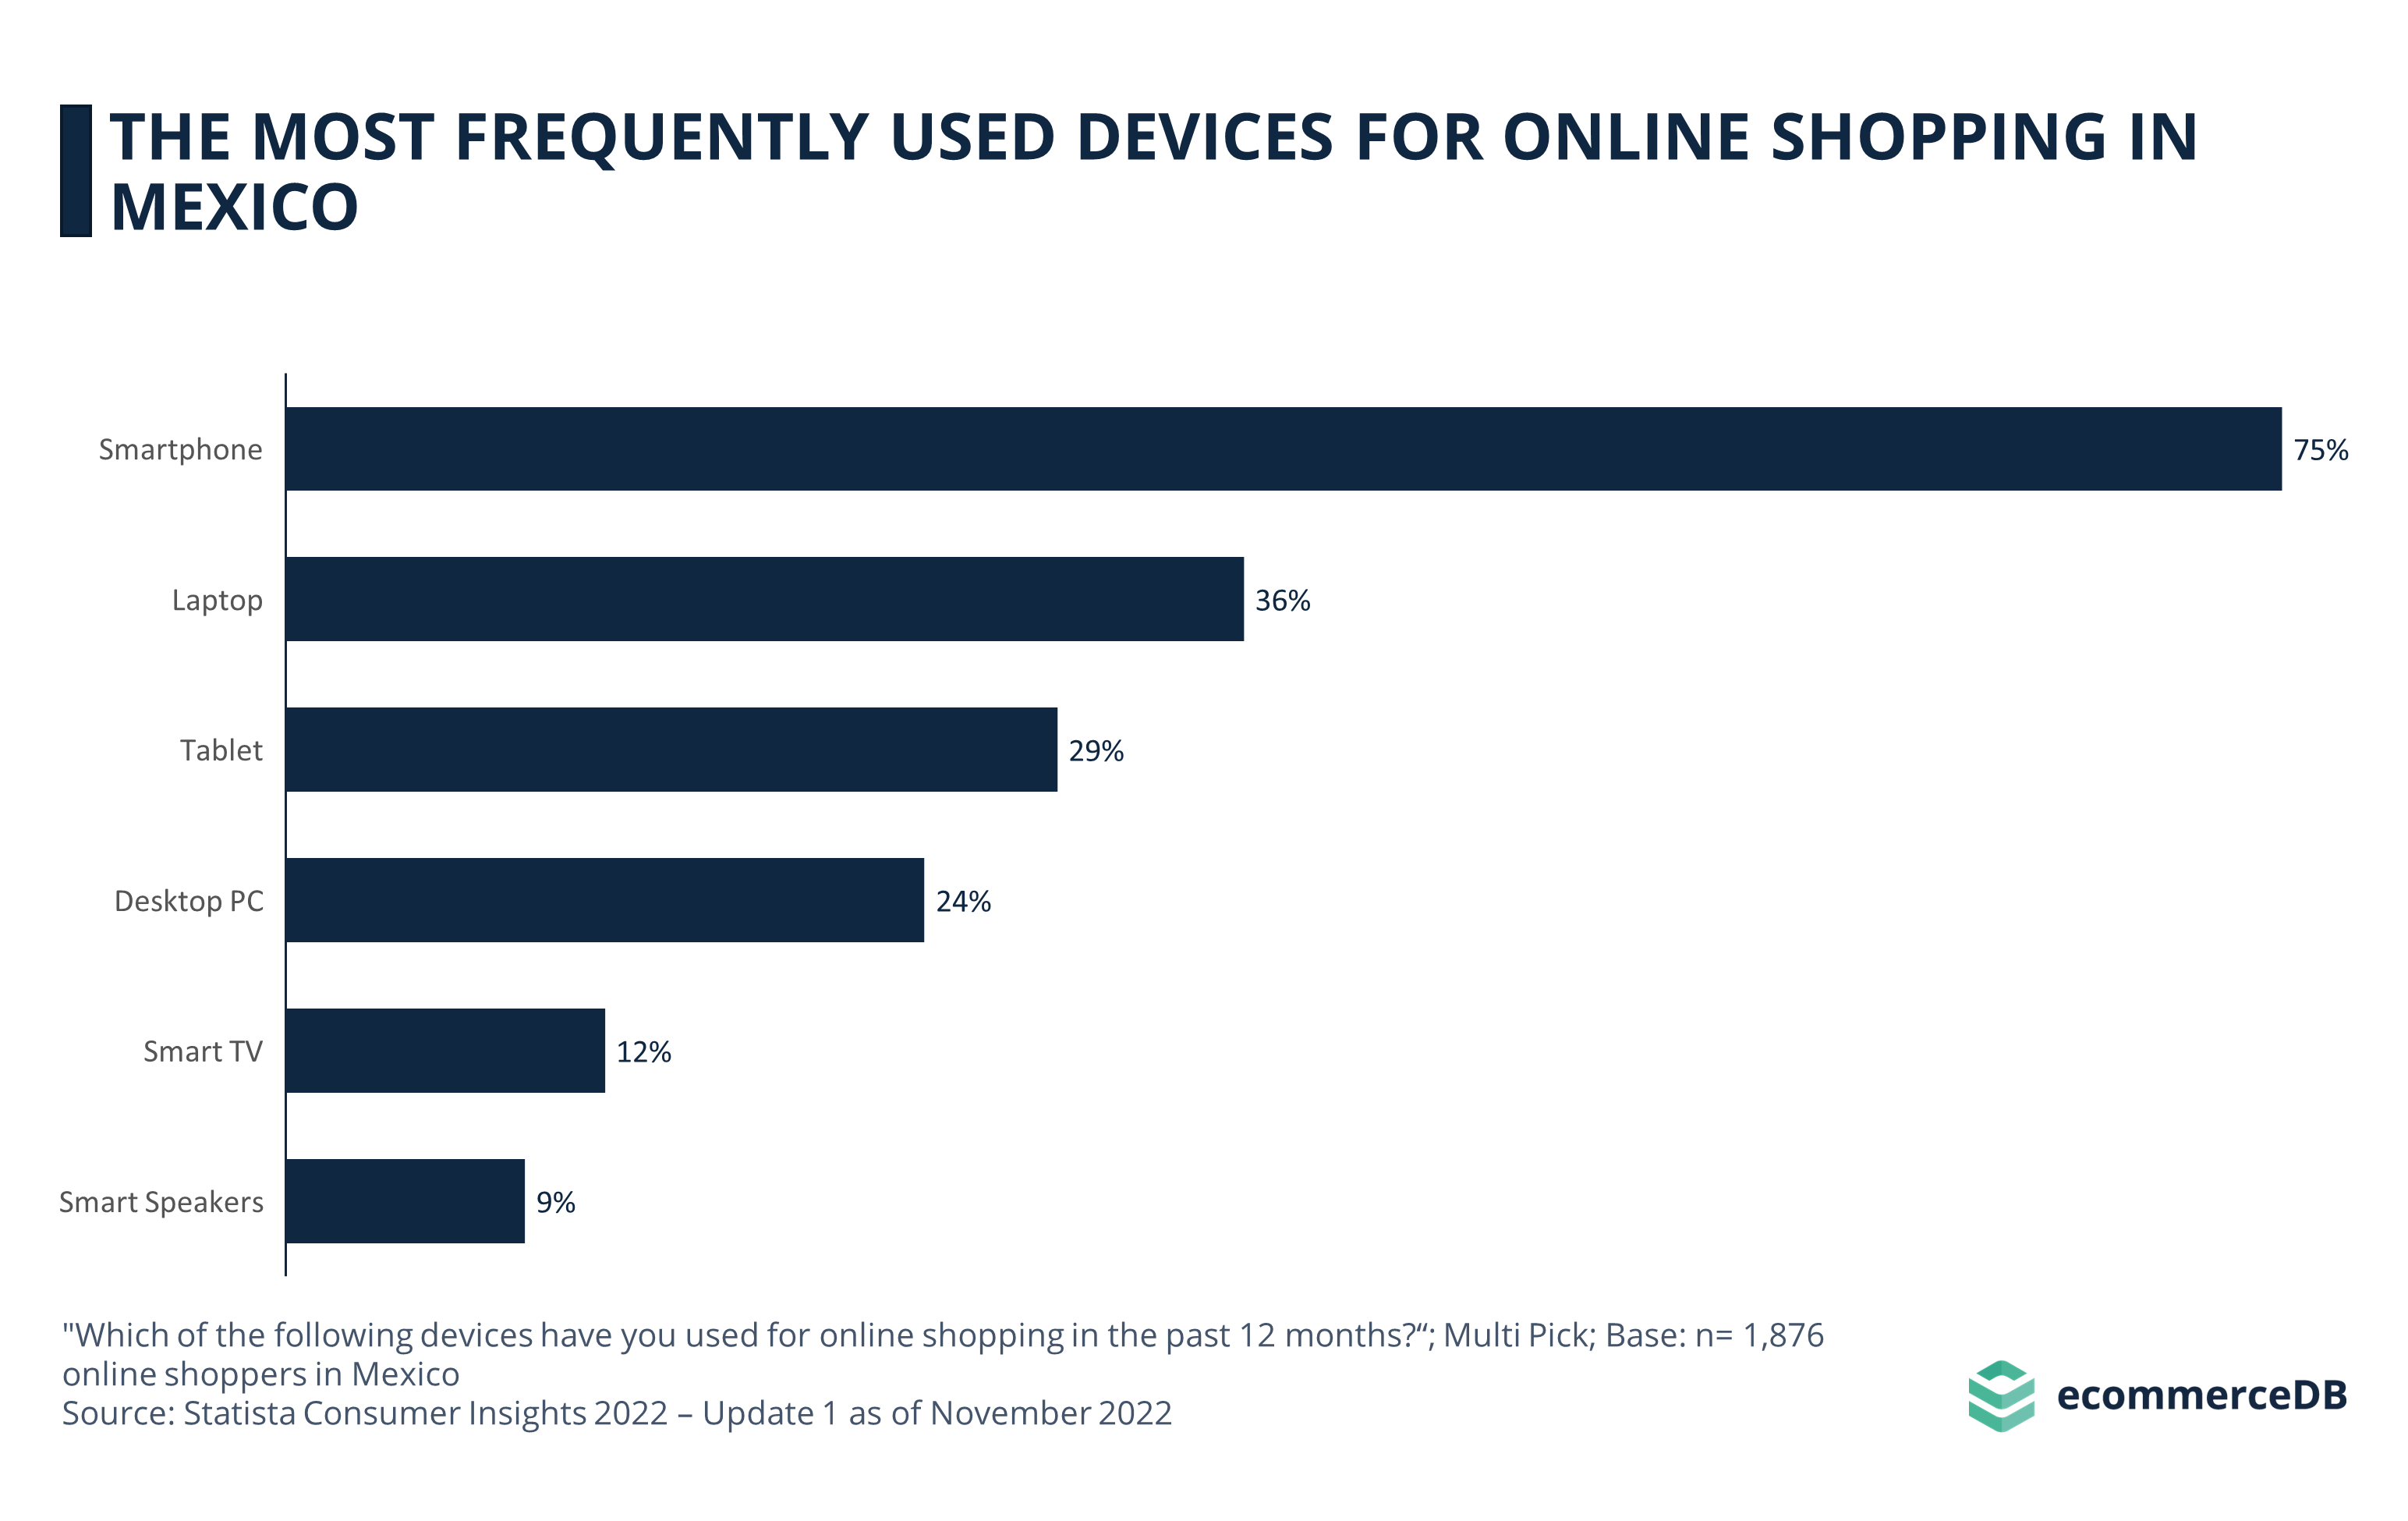 The Most Frequently Used Devices for Online Shopping in Mexico